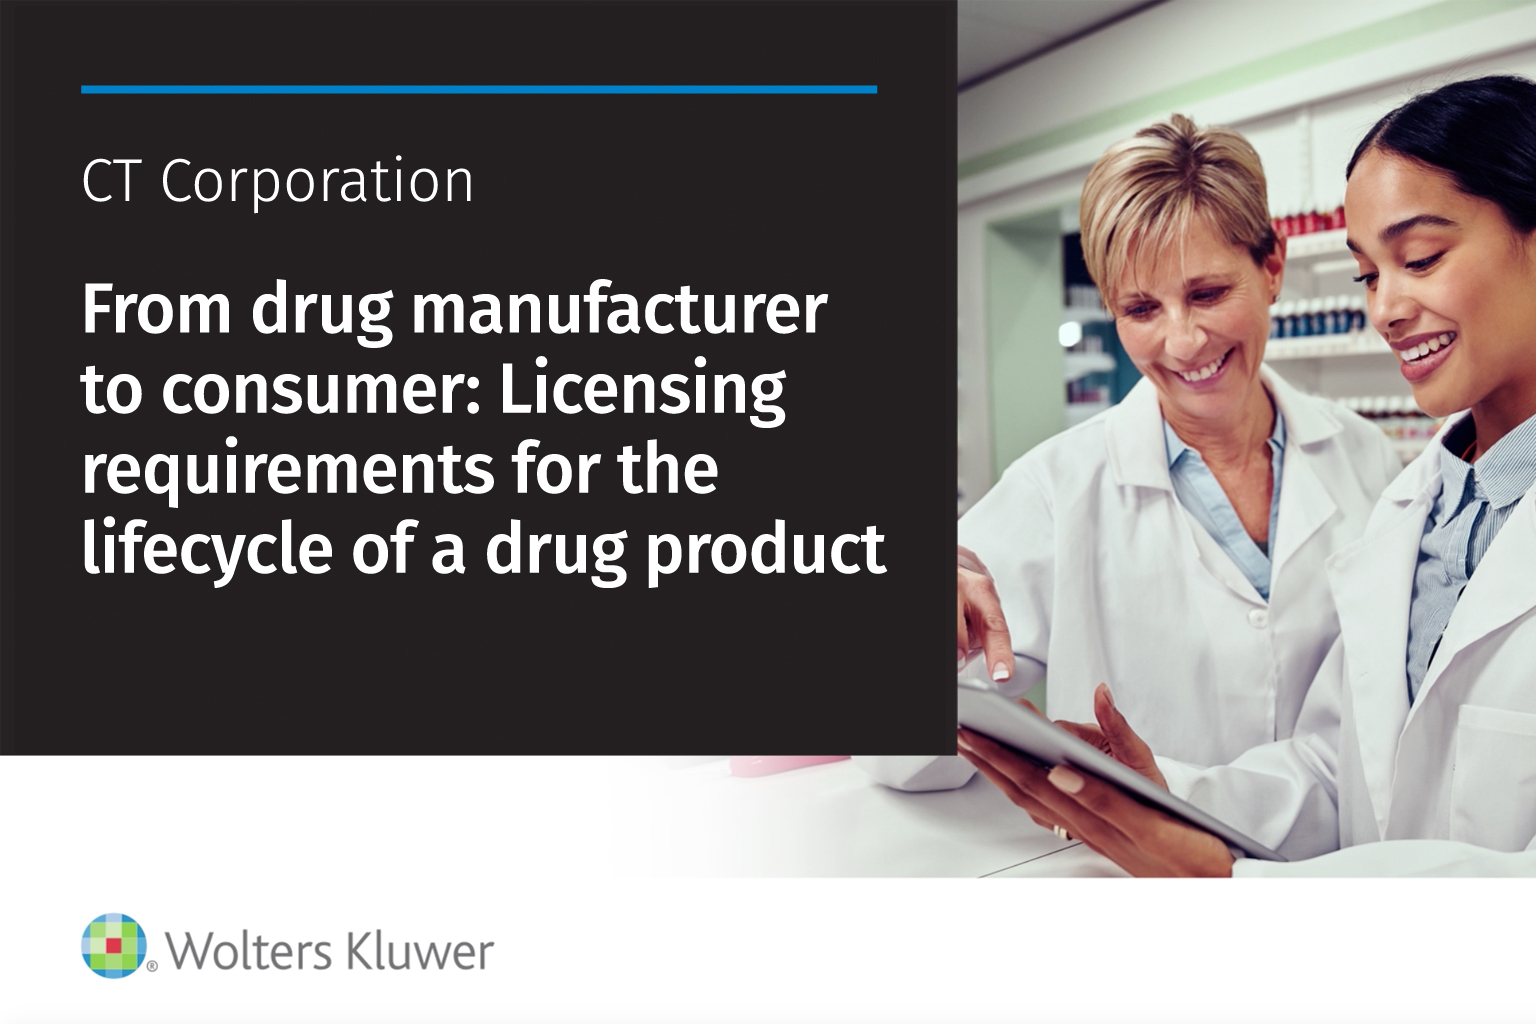 CT Corporation's licensing requirements for drugs